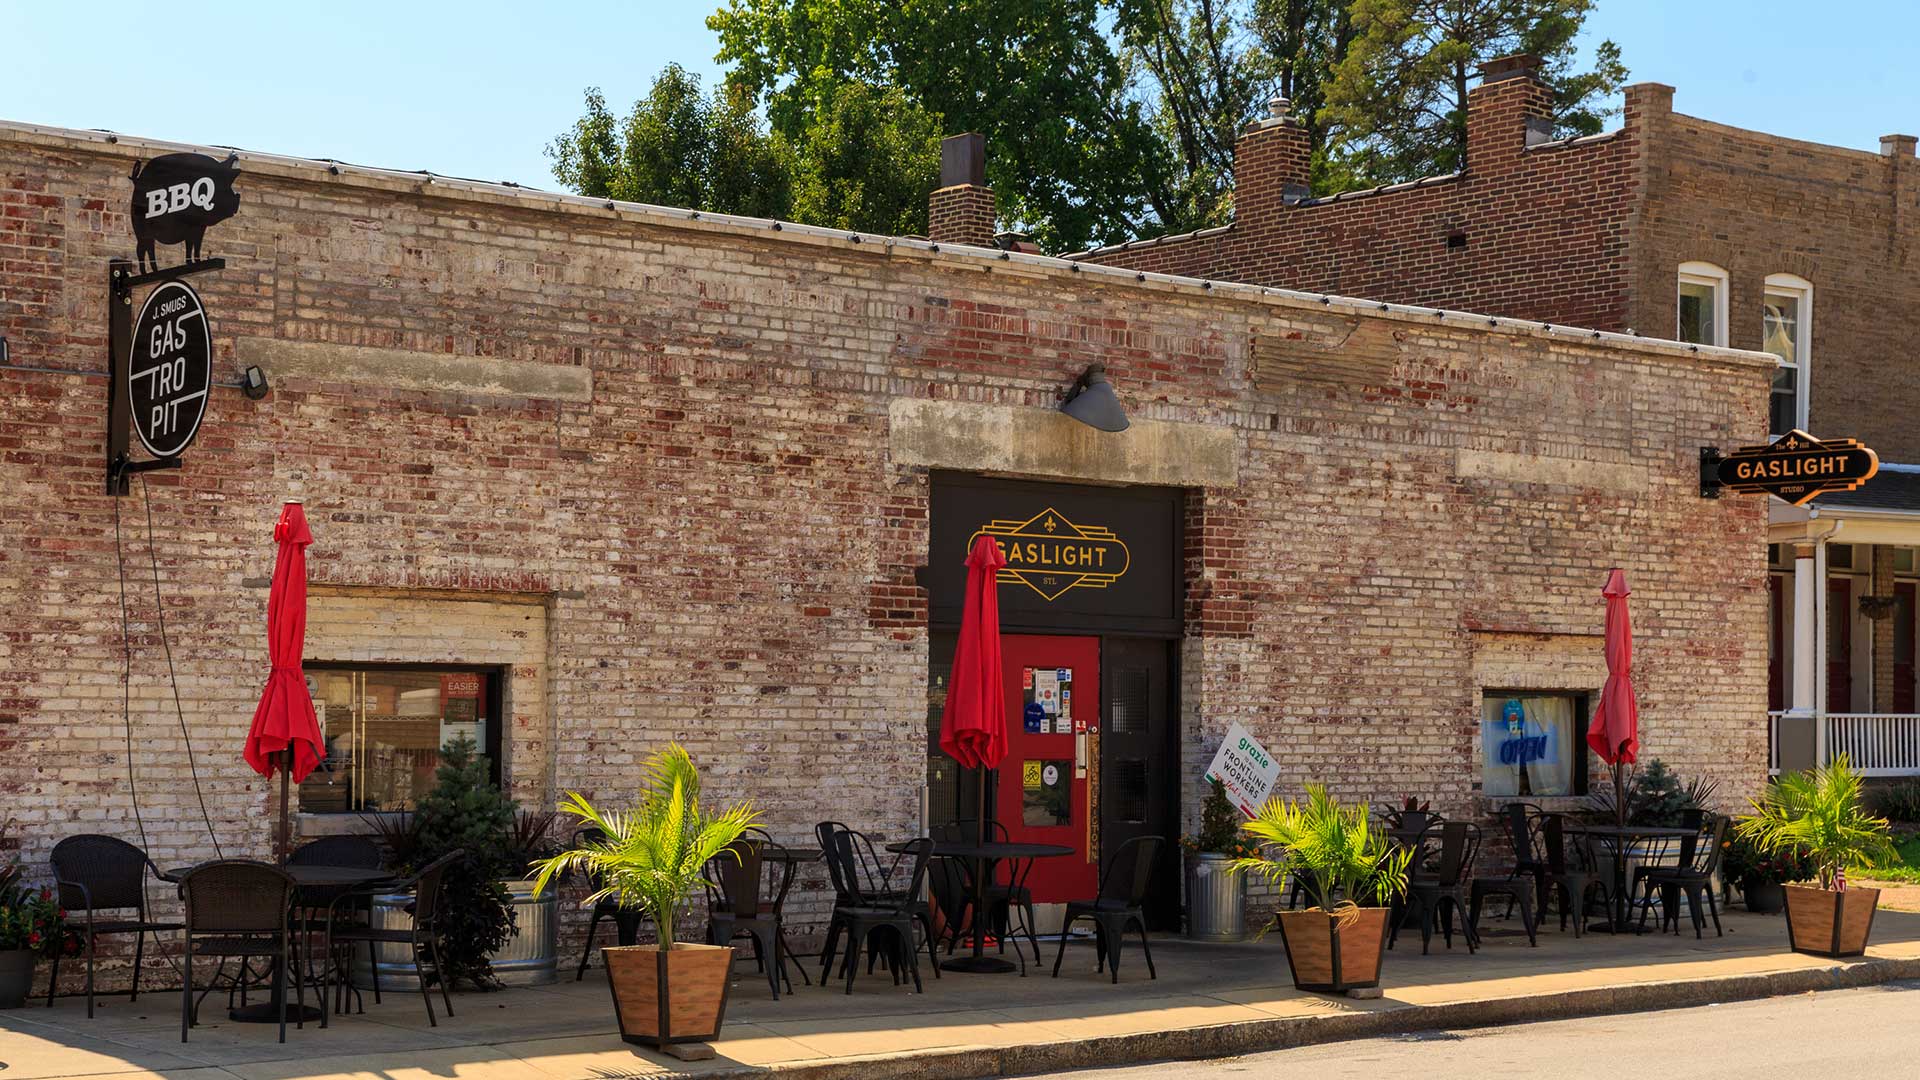 A restaurant in a brick building with several black café tables out front with their umbrellas closed.